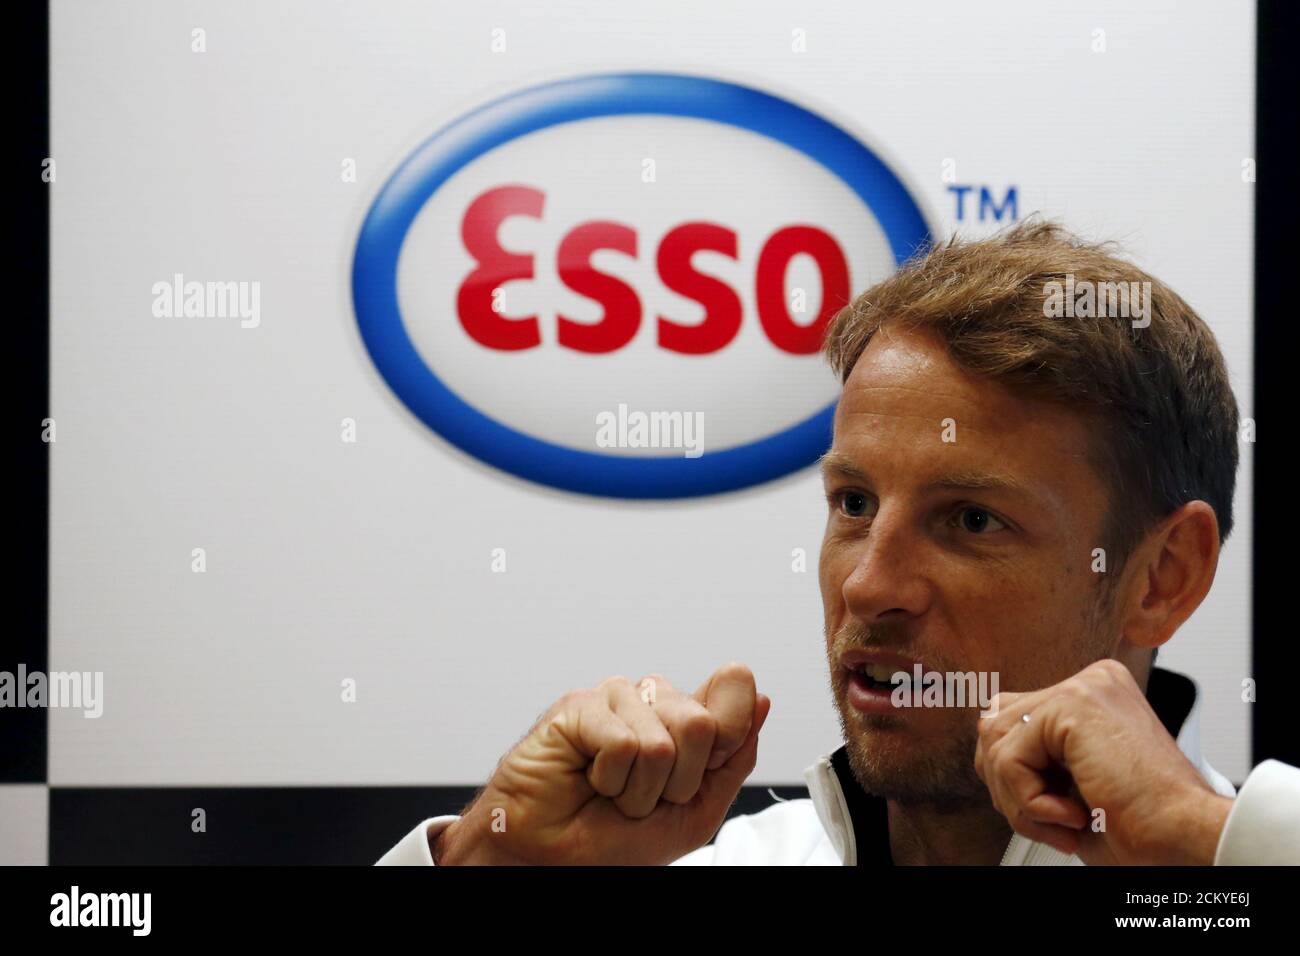 McLaren Formula One driver Jenson Button of Britain speaks to Reuters in an interview ahead of the Singapore F1 night race in Singapore September 16, 2015. The Singapore F1 Grand Prix night race takes place from September 18, 2015. REUTERS/Edgar Su Stock Photo